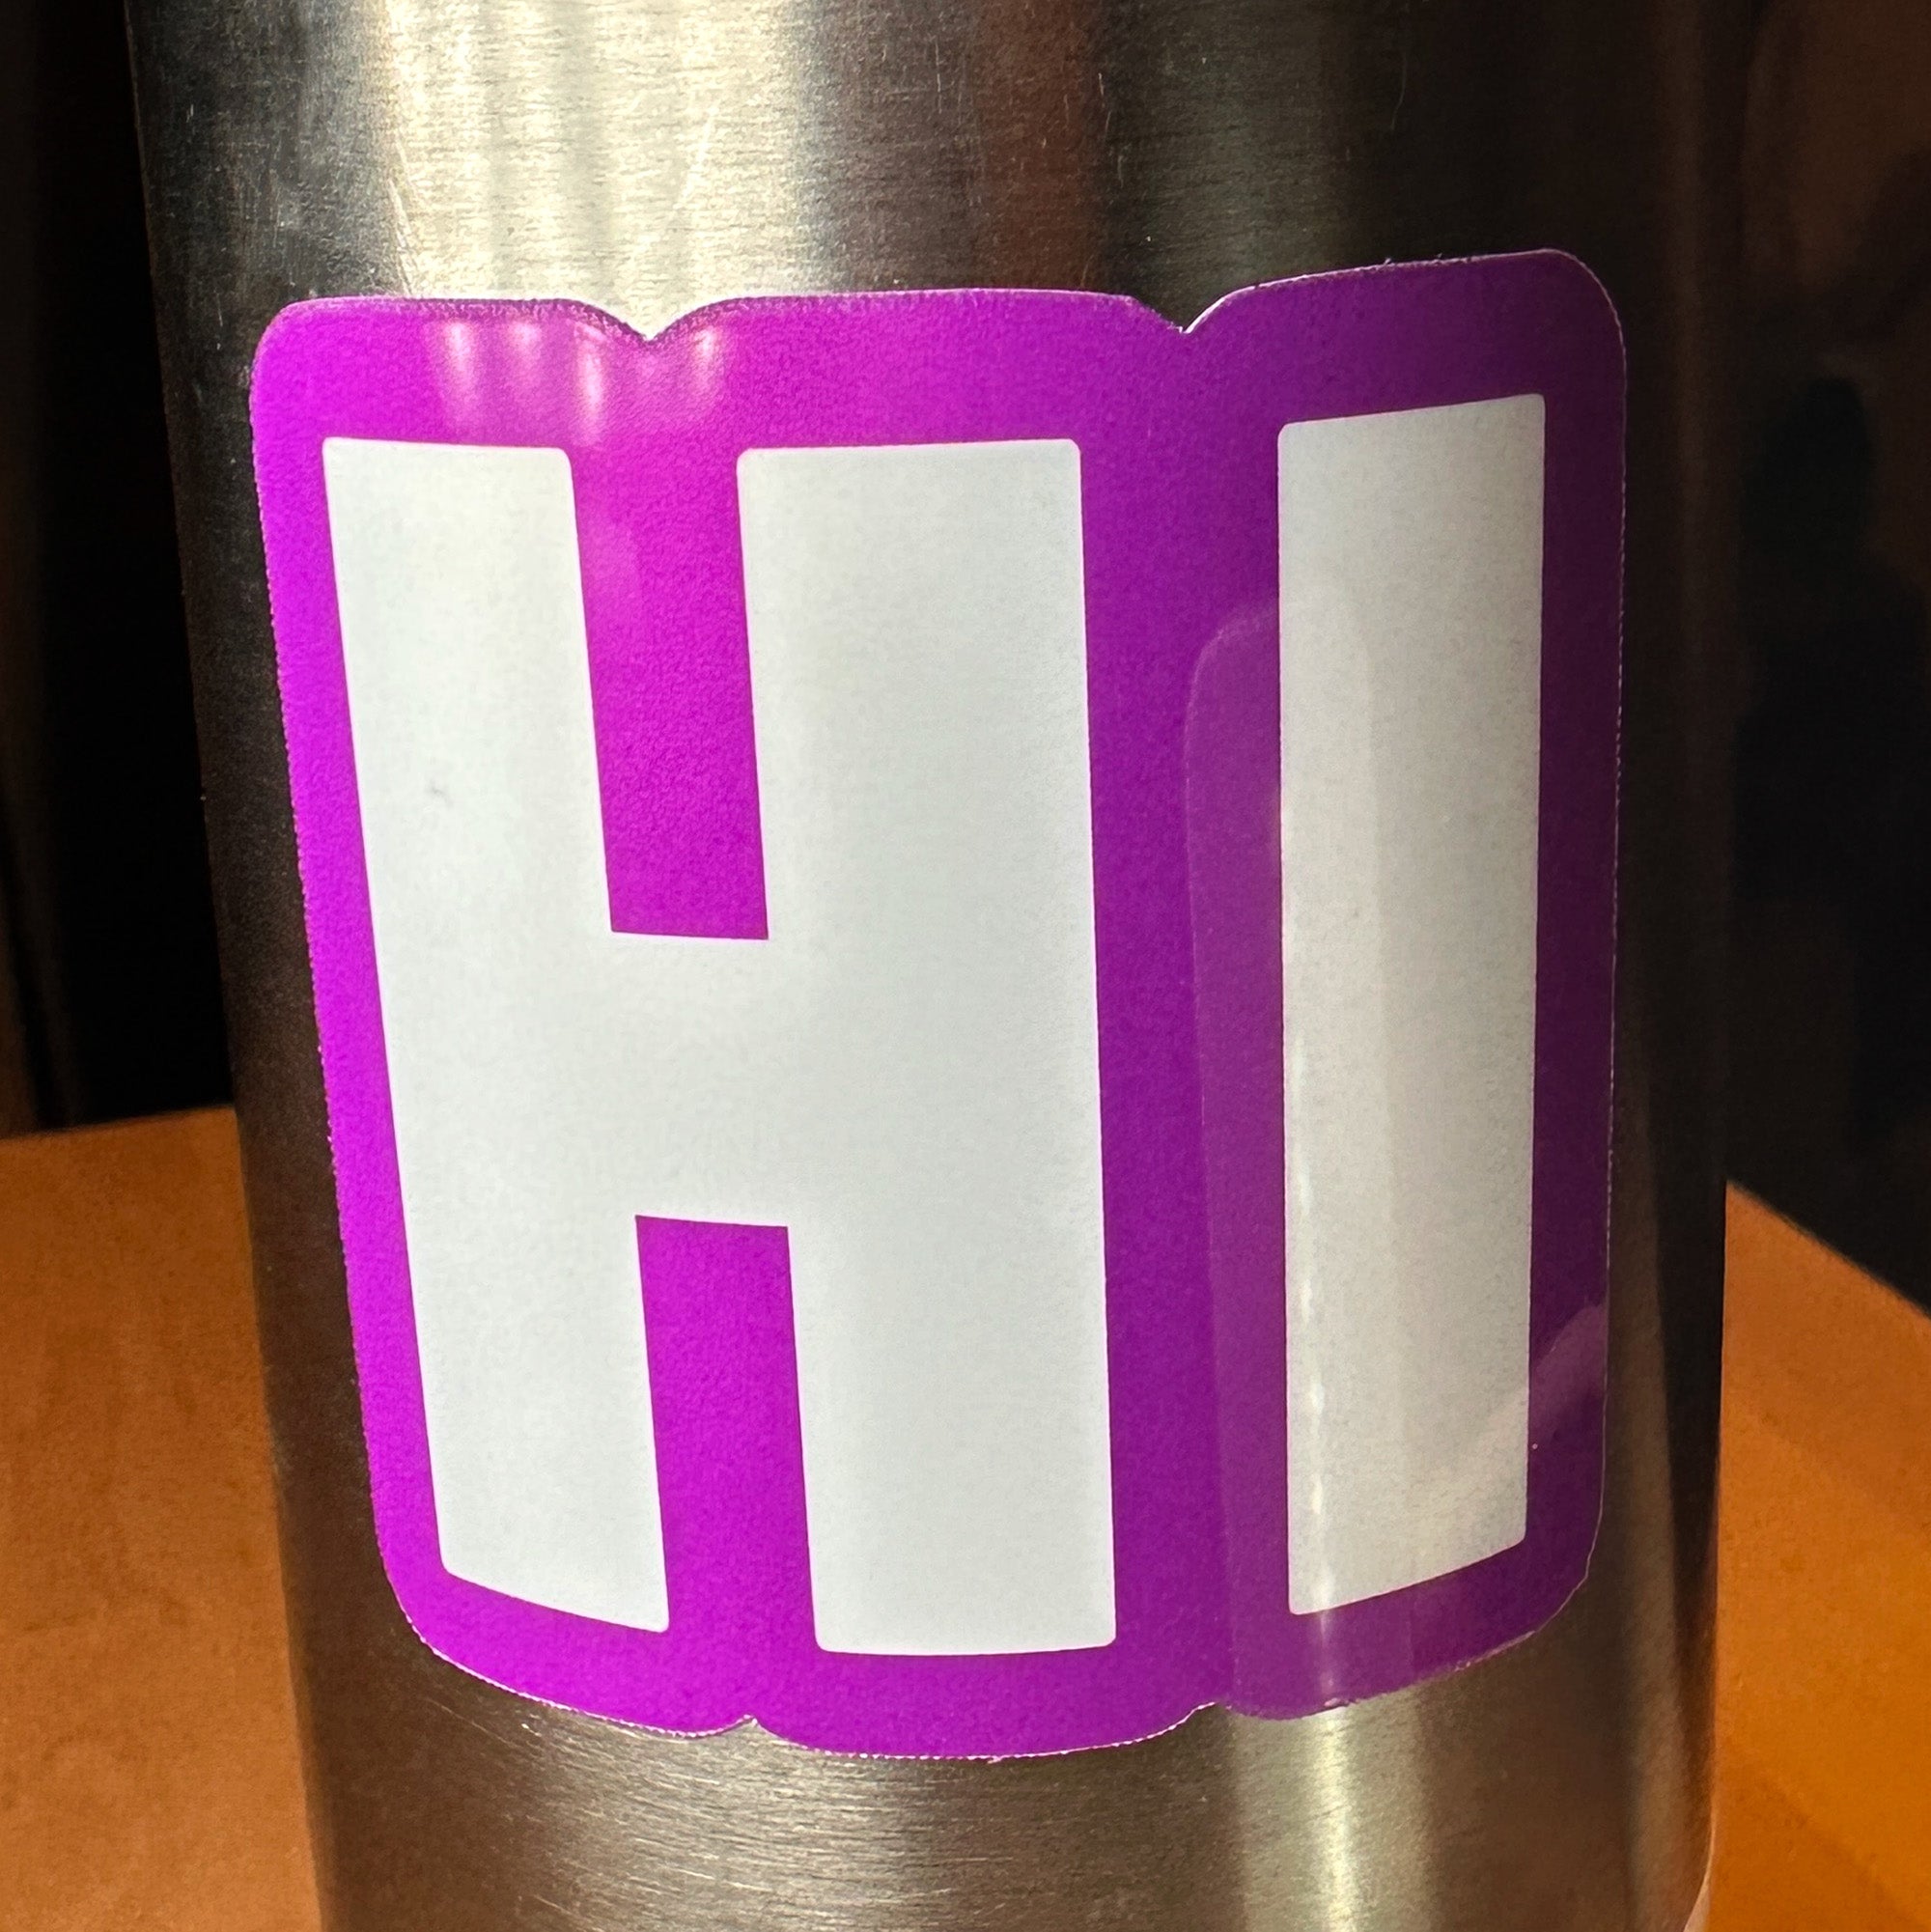 photo of square vinyl sticker with the word HI in white with a purple background on a metal water bottle